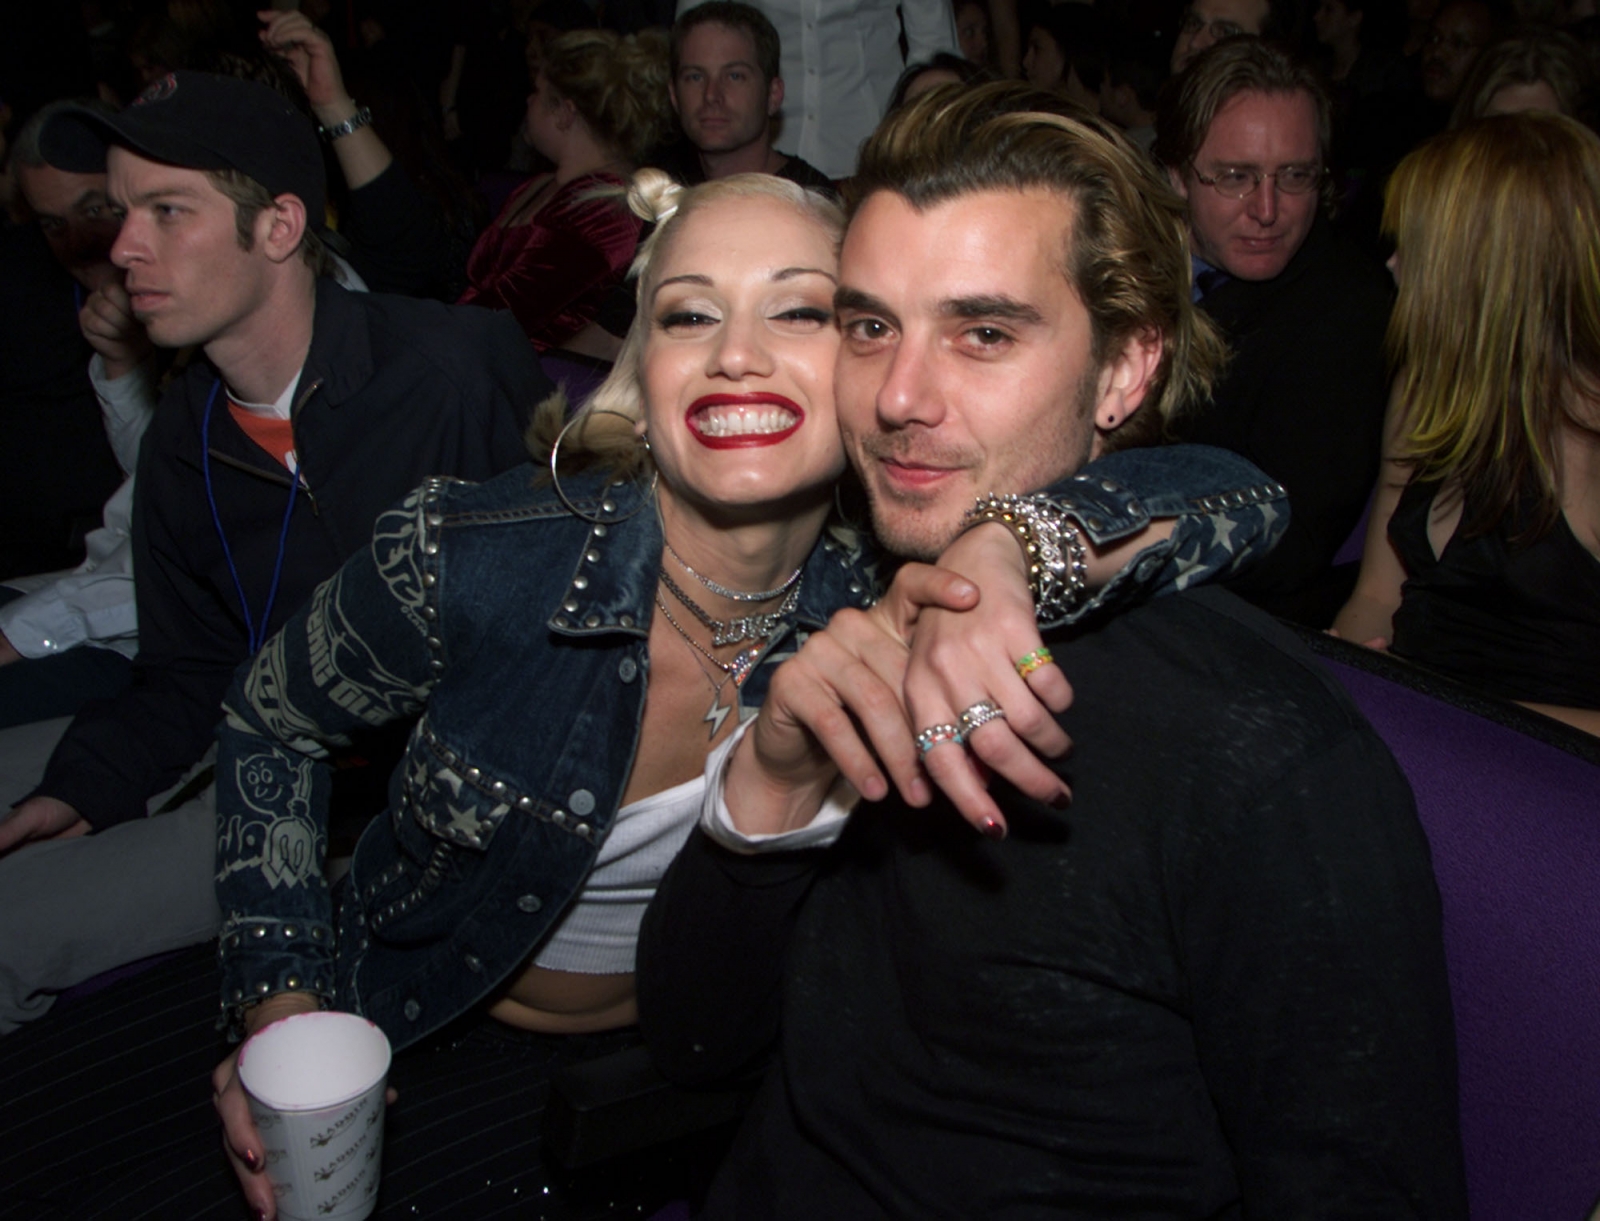 Gwen Stefani and Gavin Rossdale divorce: A look back at their relationship